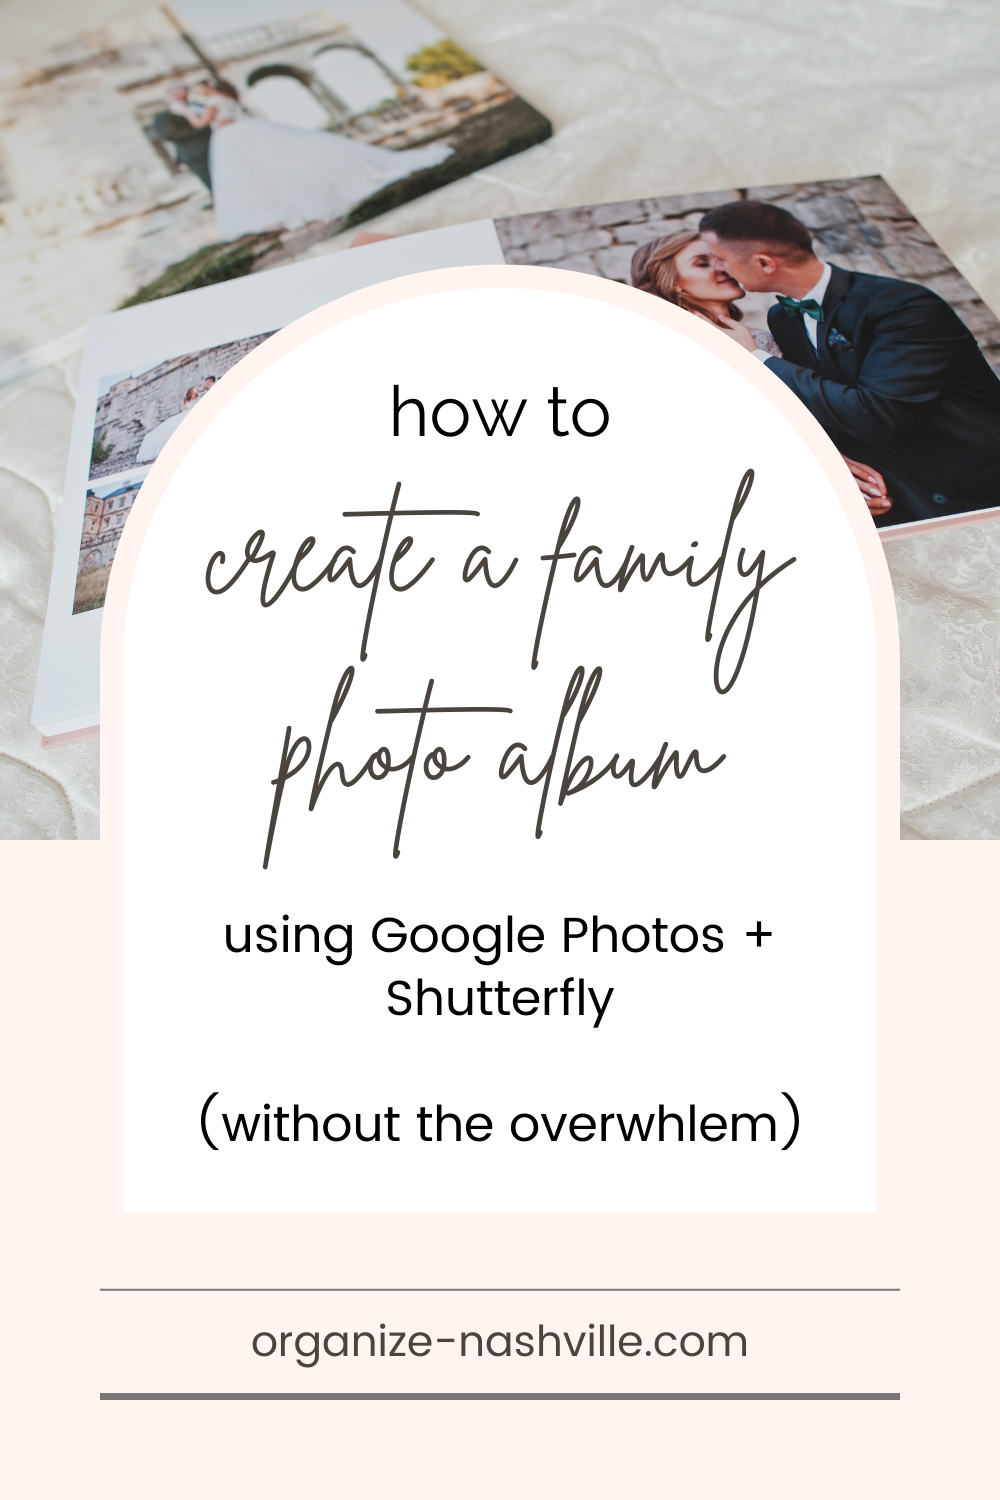 How to create a family photo album (without the overwhelm